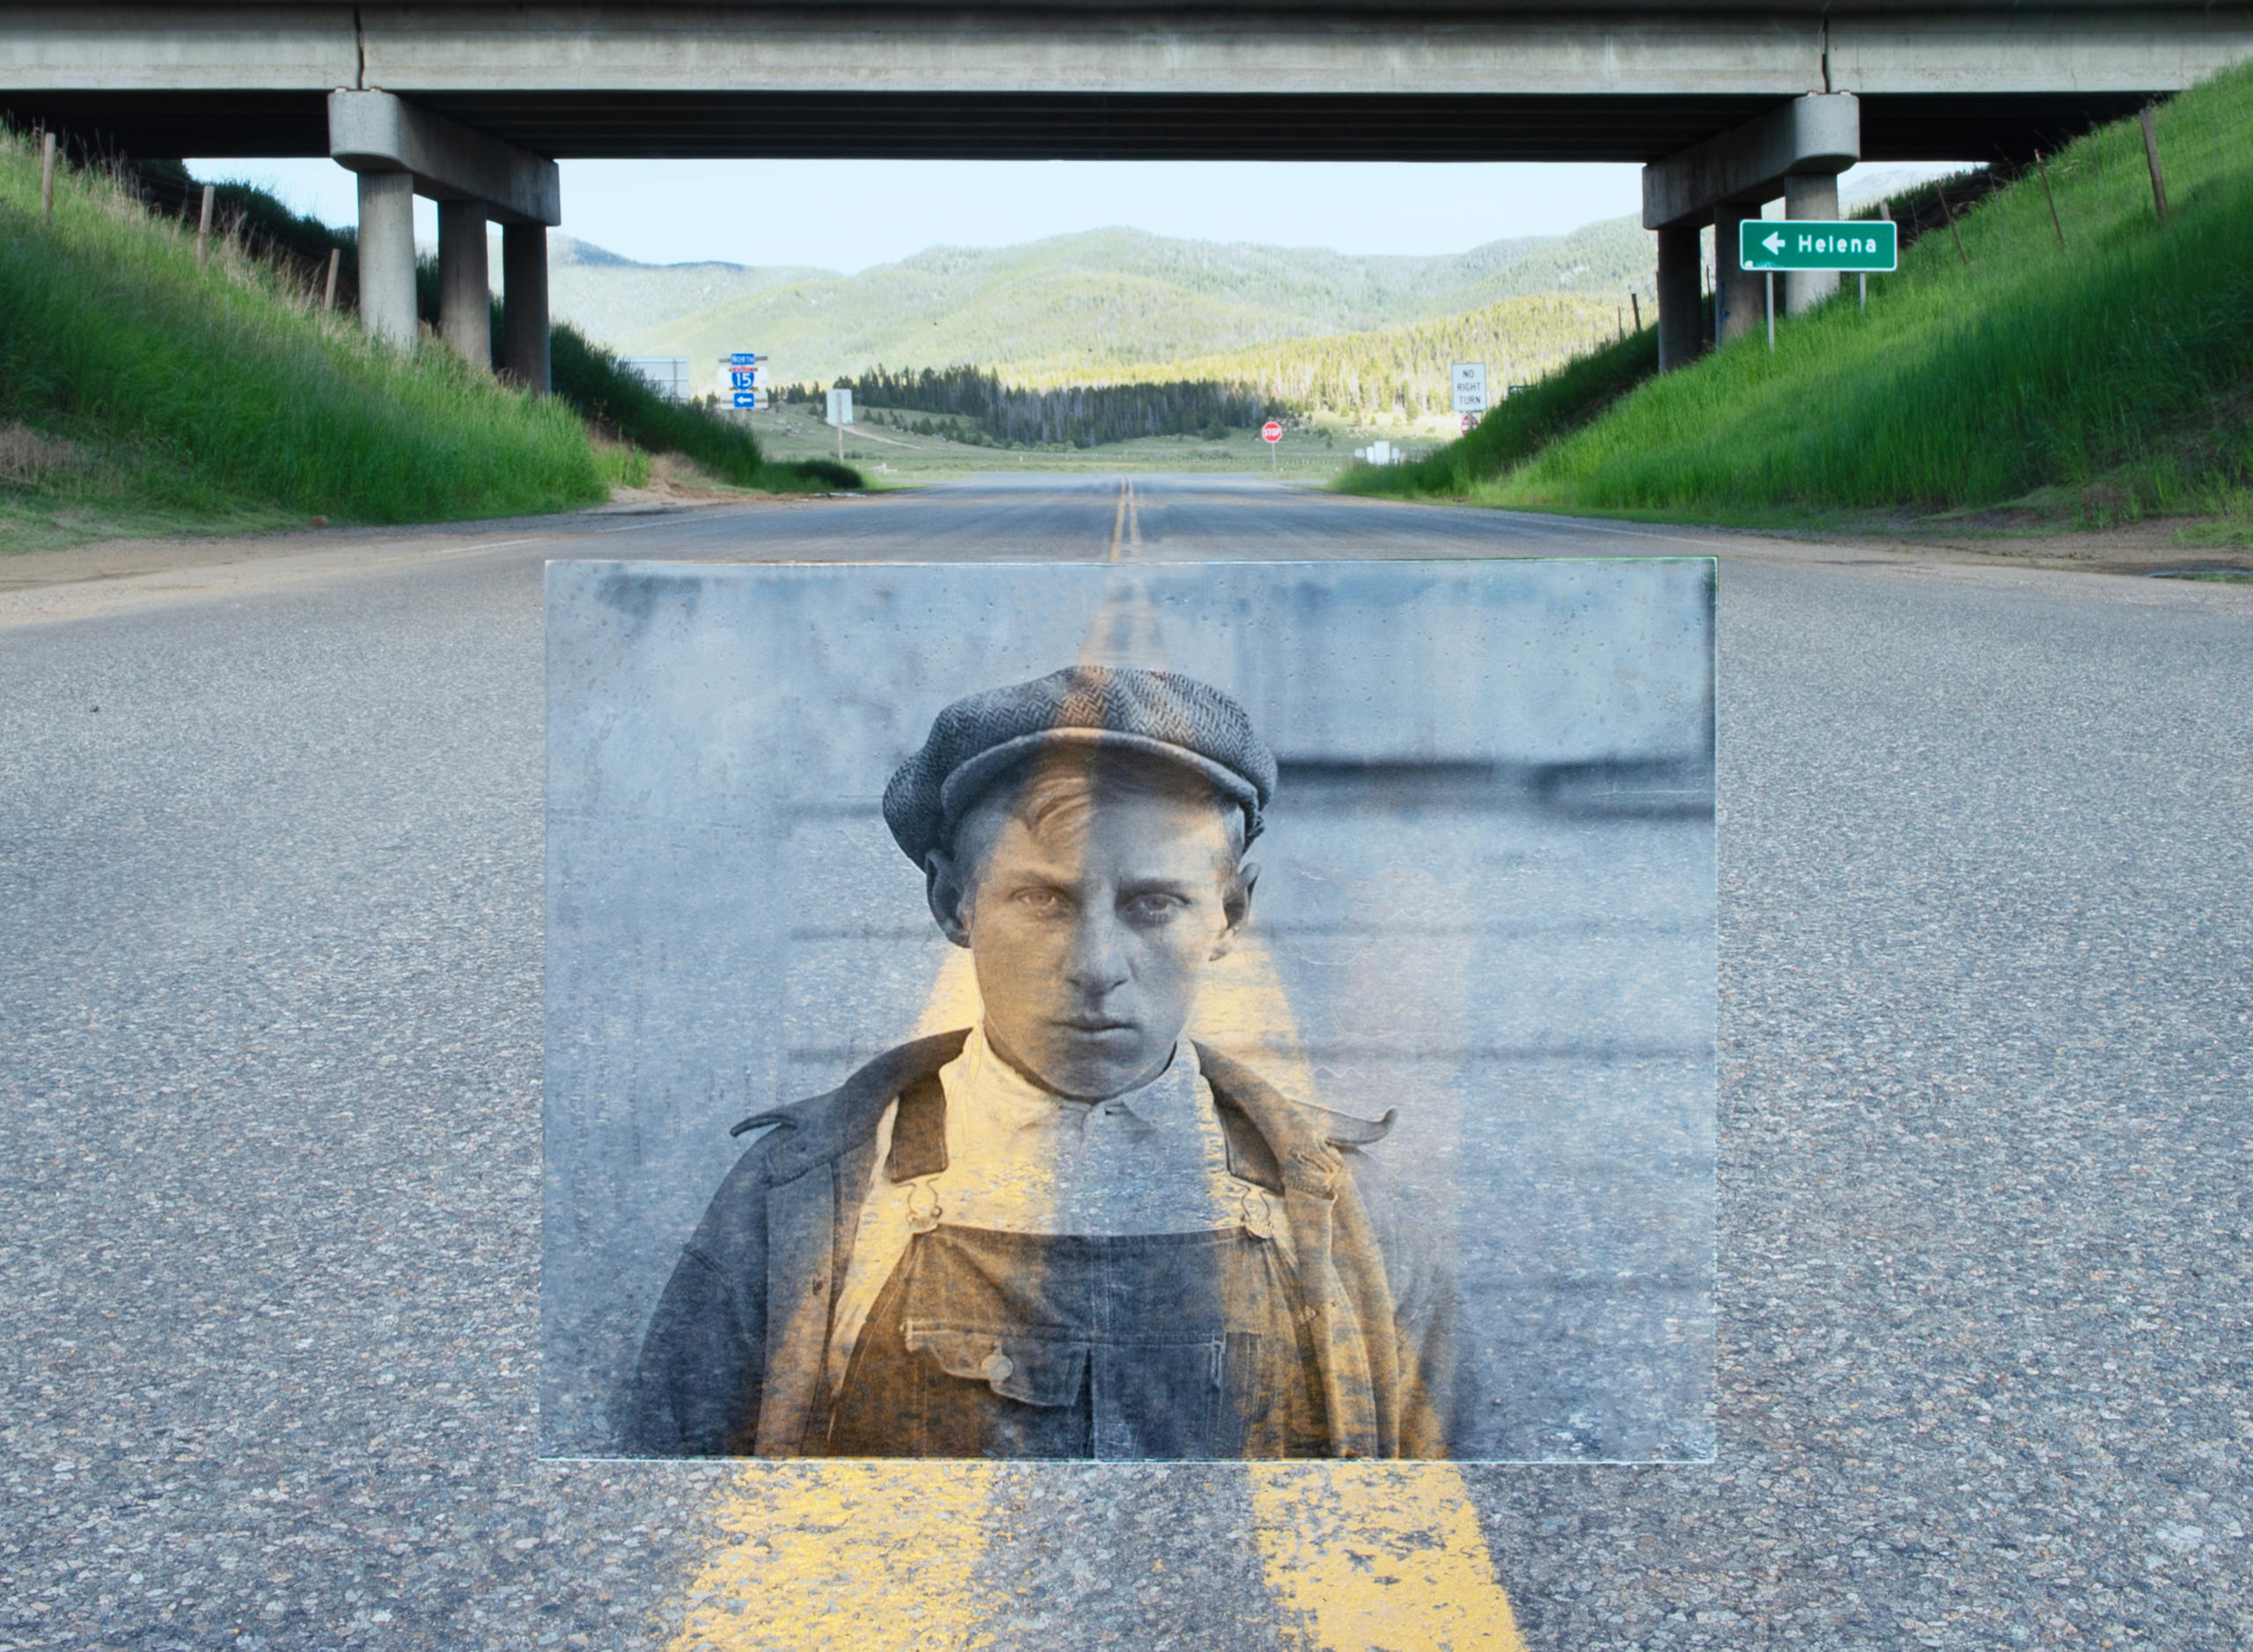 Photo of a boy, in the background a highway.